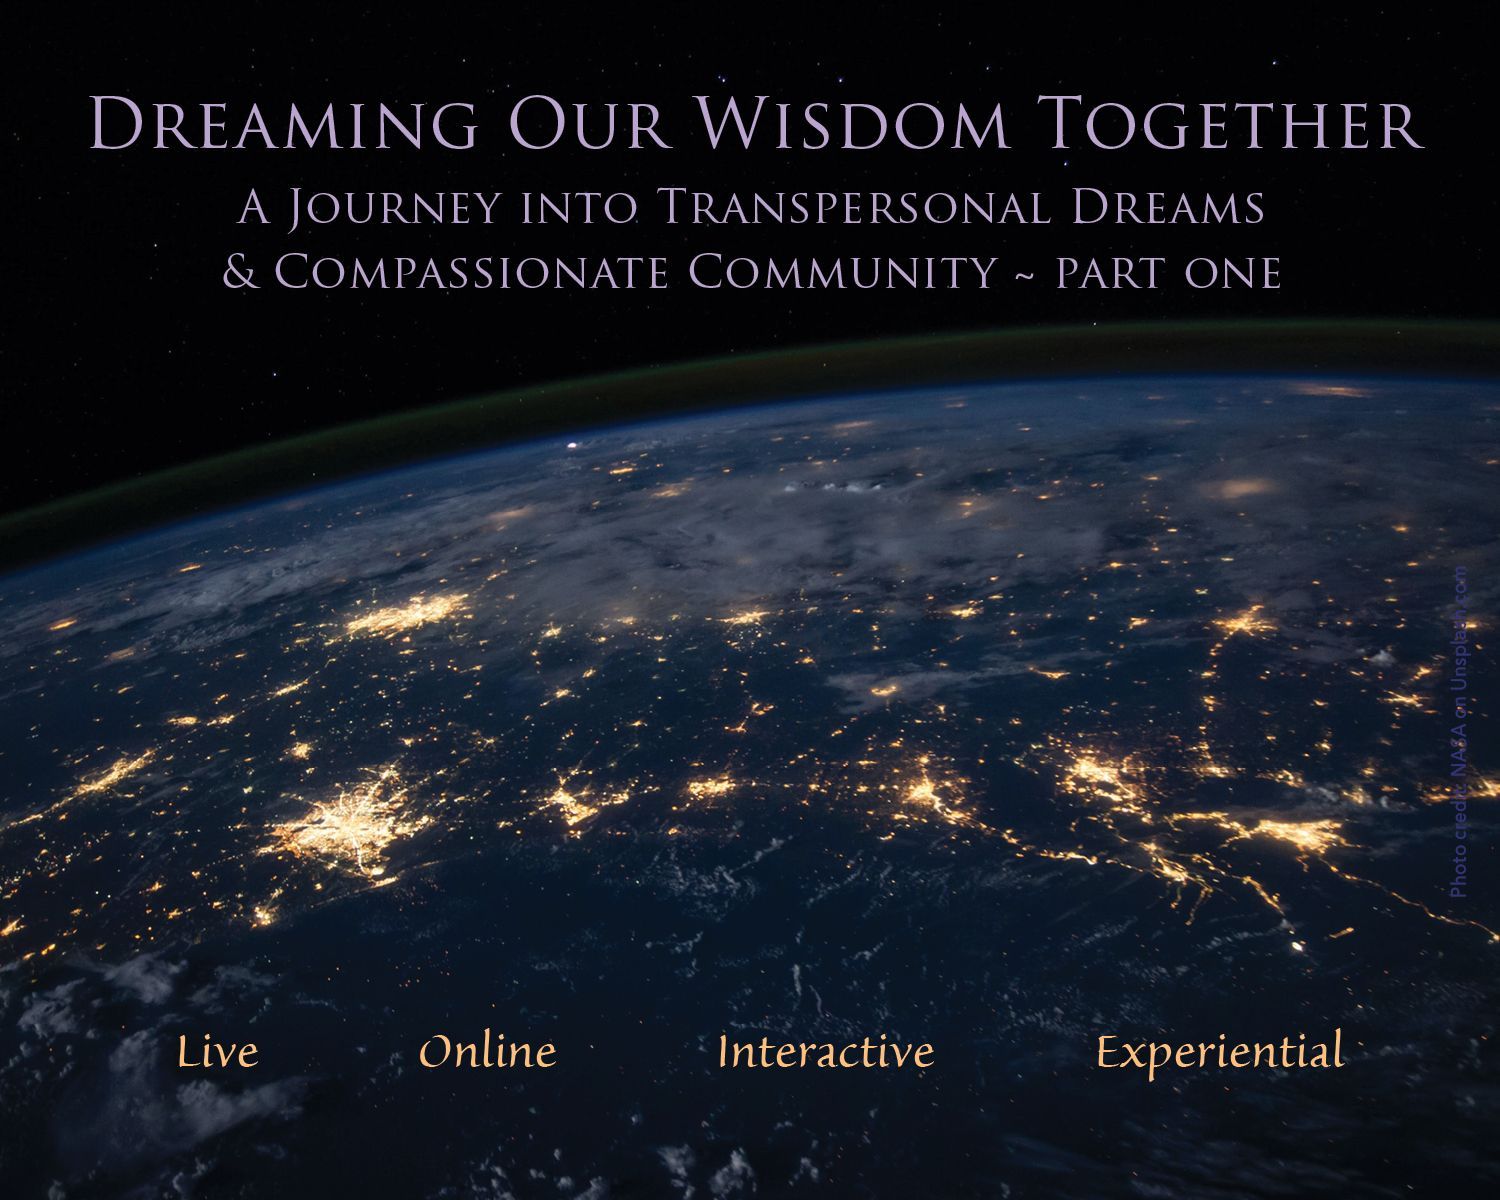 Dreaming Our Wisdom Together - A journey into transpersonal dreams & compassionate community